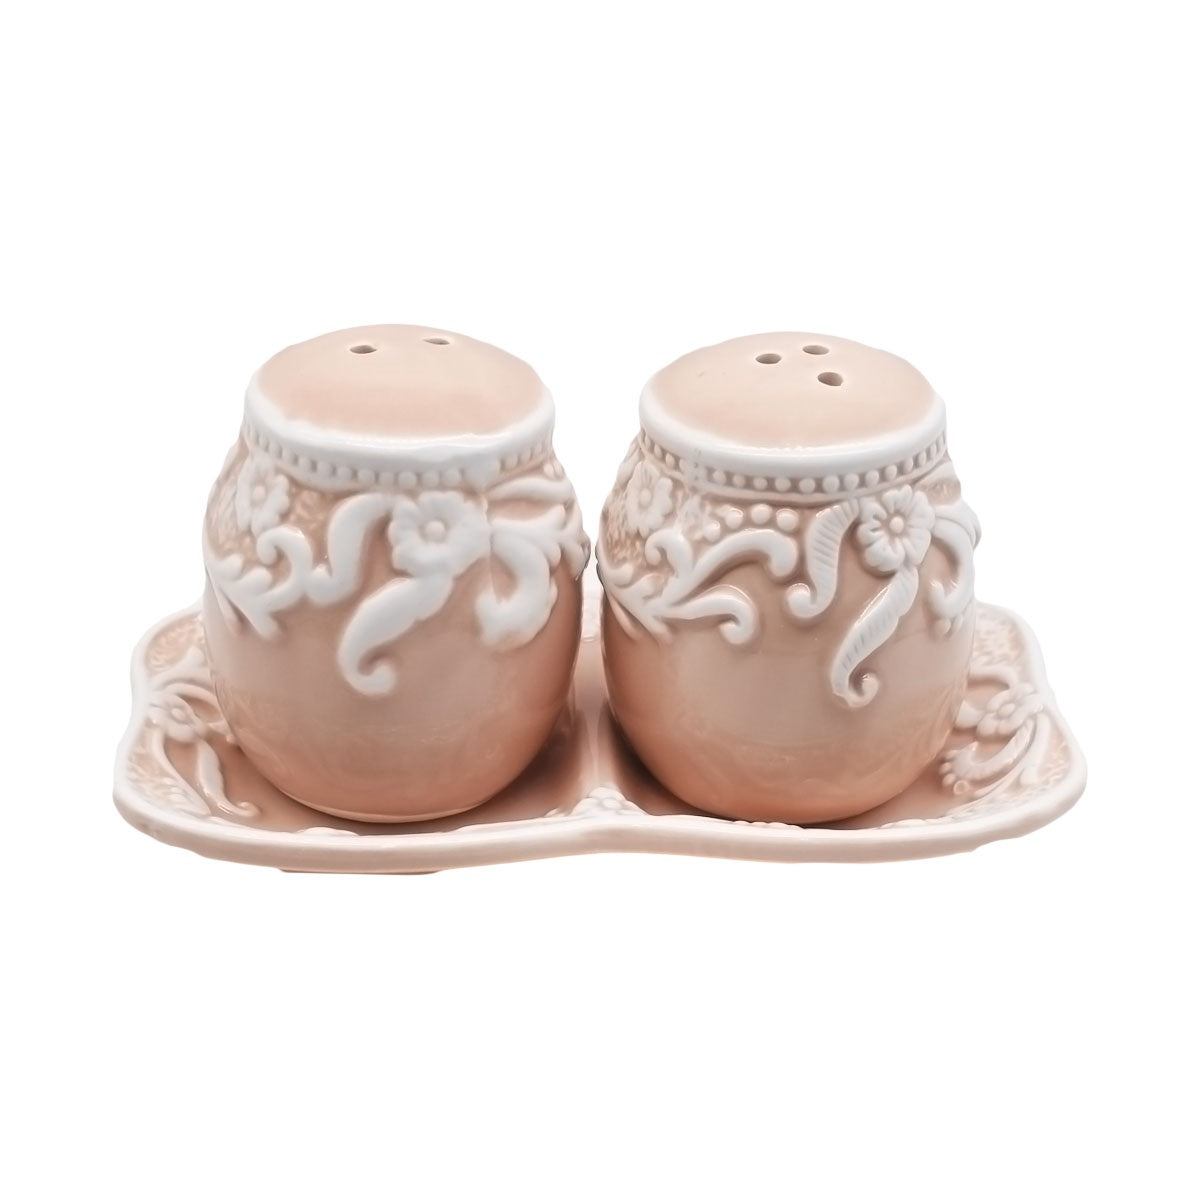 Ceramic Salt and Pepper Set with tray, Floral Design, Peach White (8566)